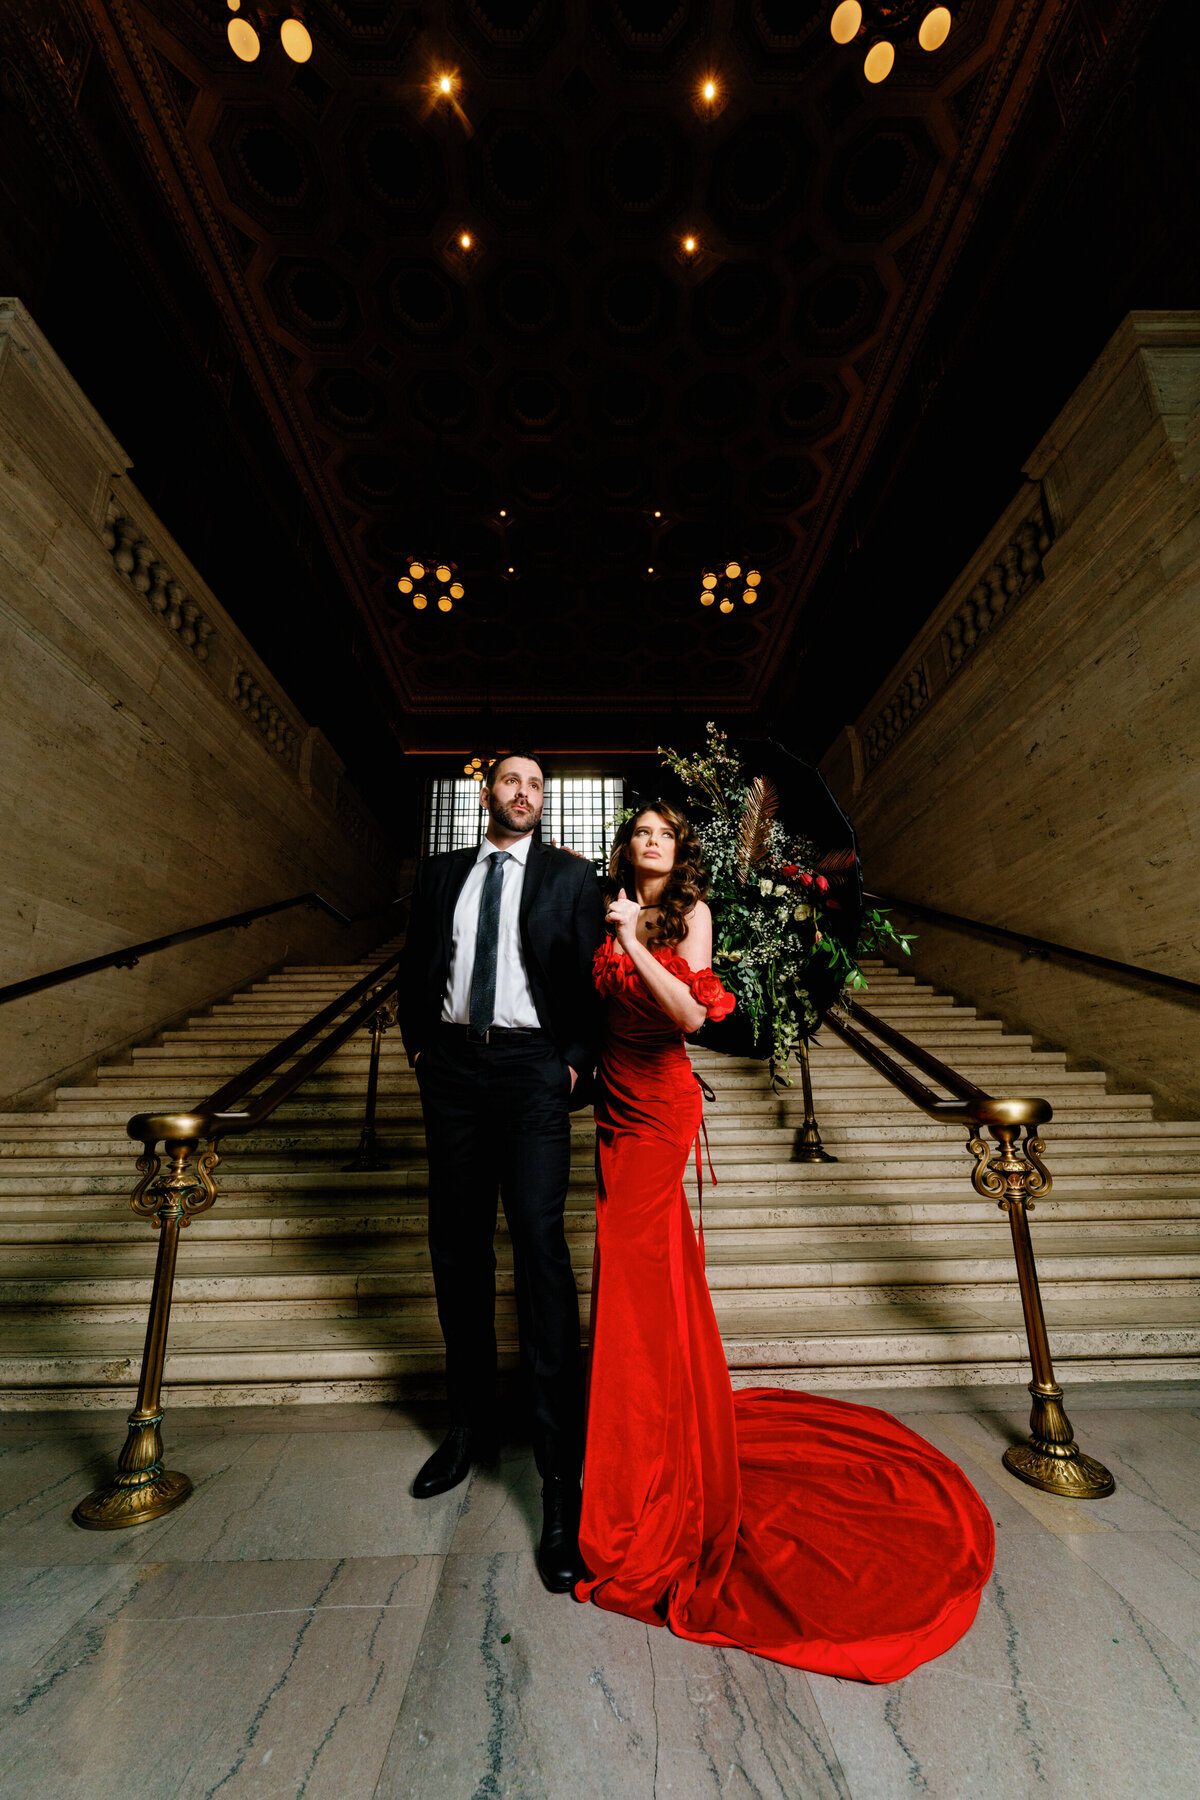 Aspen-Avenue-Chicago-Wedding-Photographer-Union-Station-Chicago-Theater-Engagement-Session-Timeless-Romantic-Red-Dress-Editorial-Stemming-From-Love-Bry-Jean-Artistry-The-Bridal-Collective-True-to-color-Luxury-FAV-11